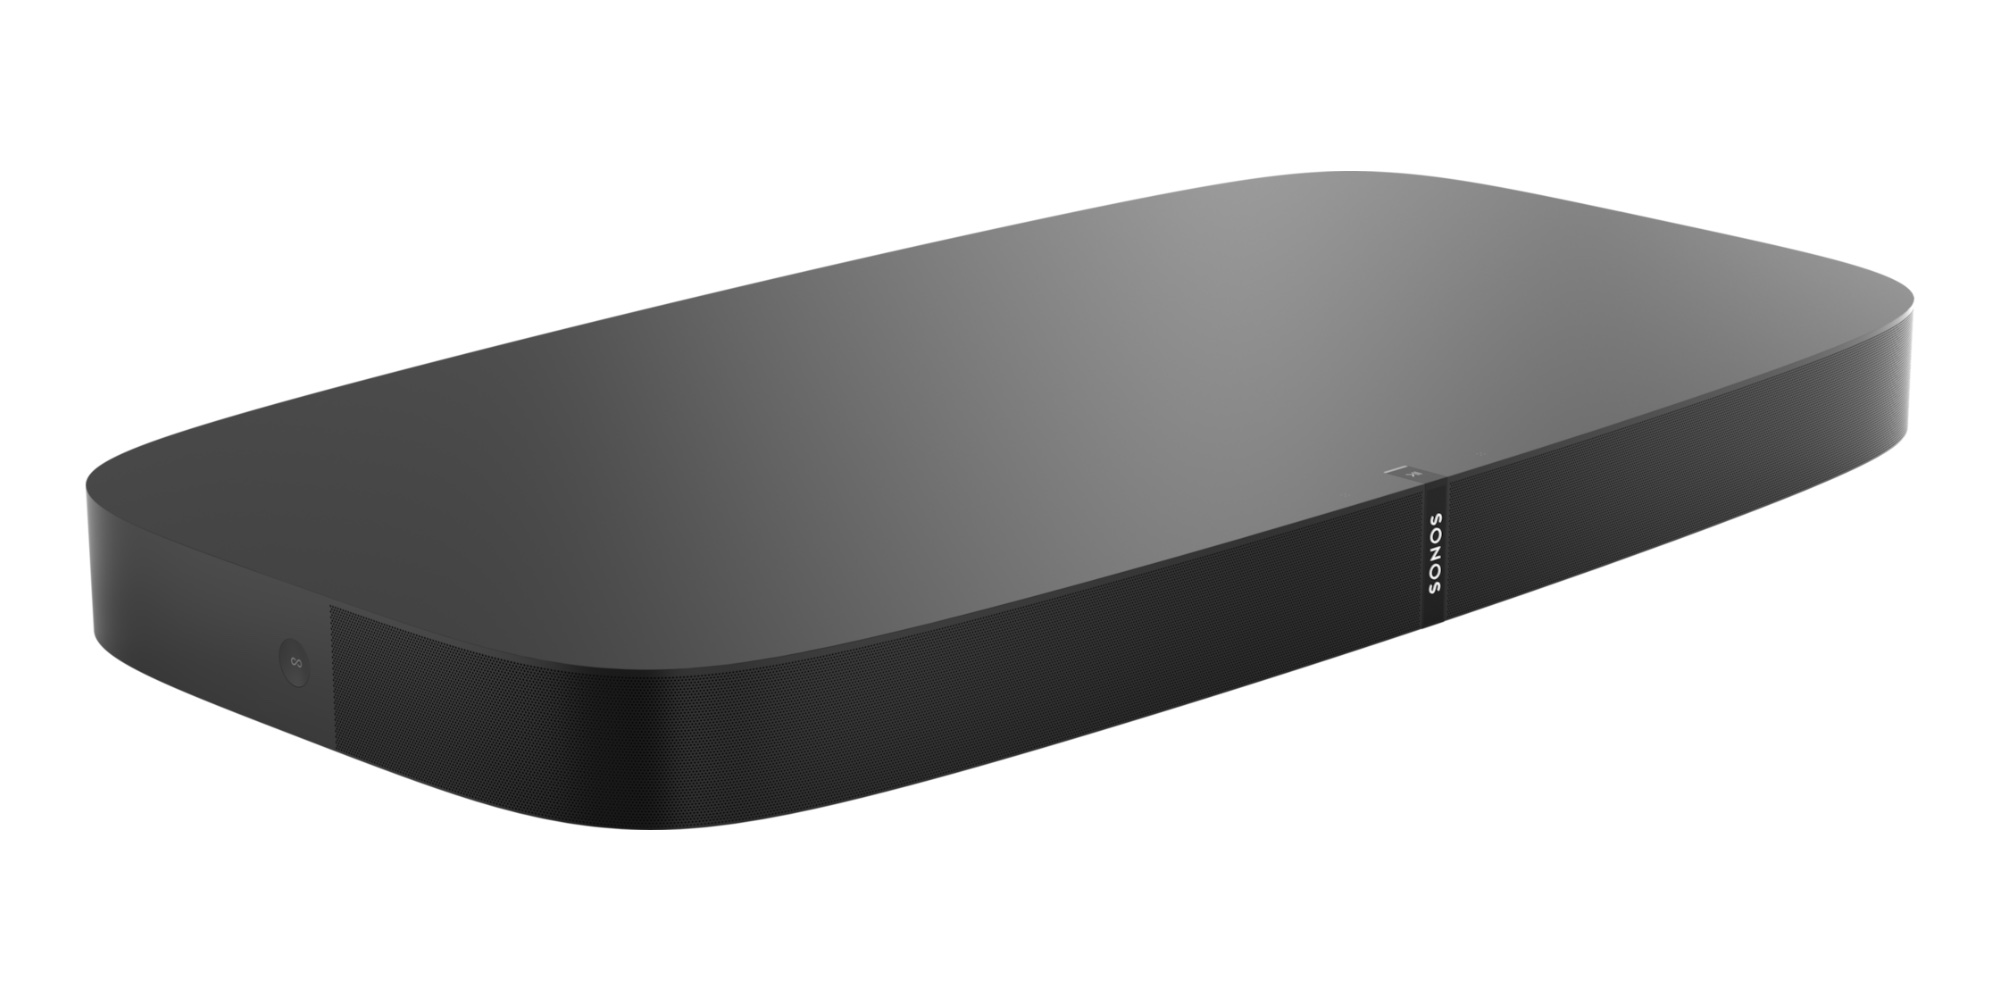 Sonos Playbase delivers AirPlay 2, more 